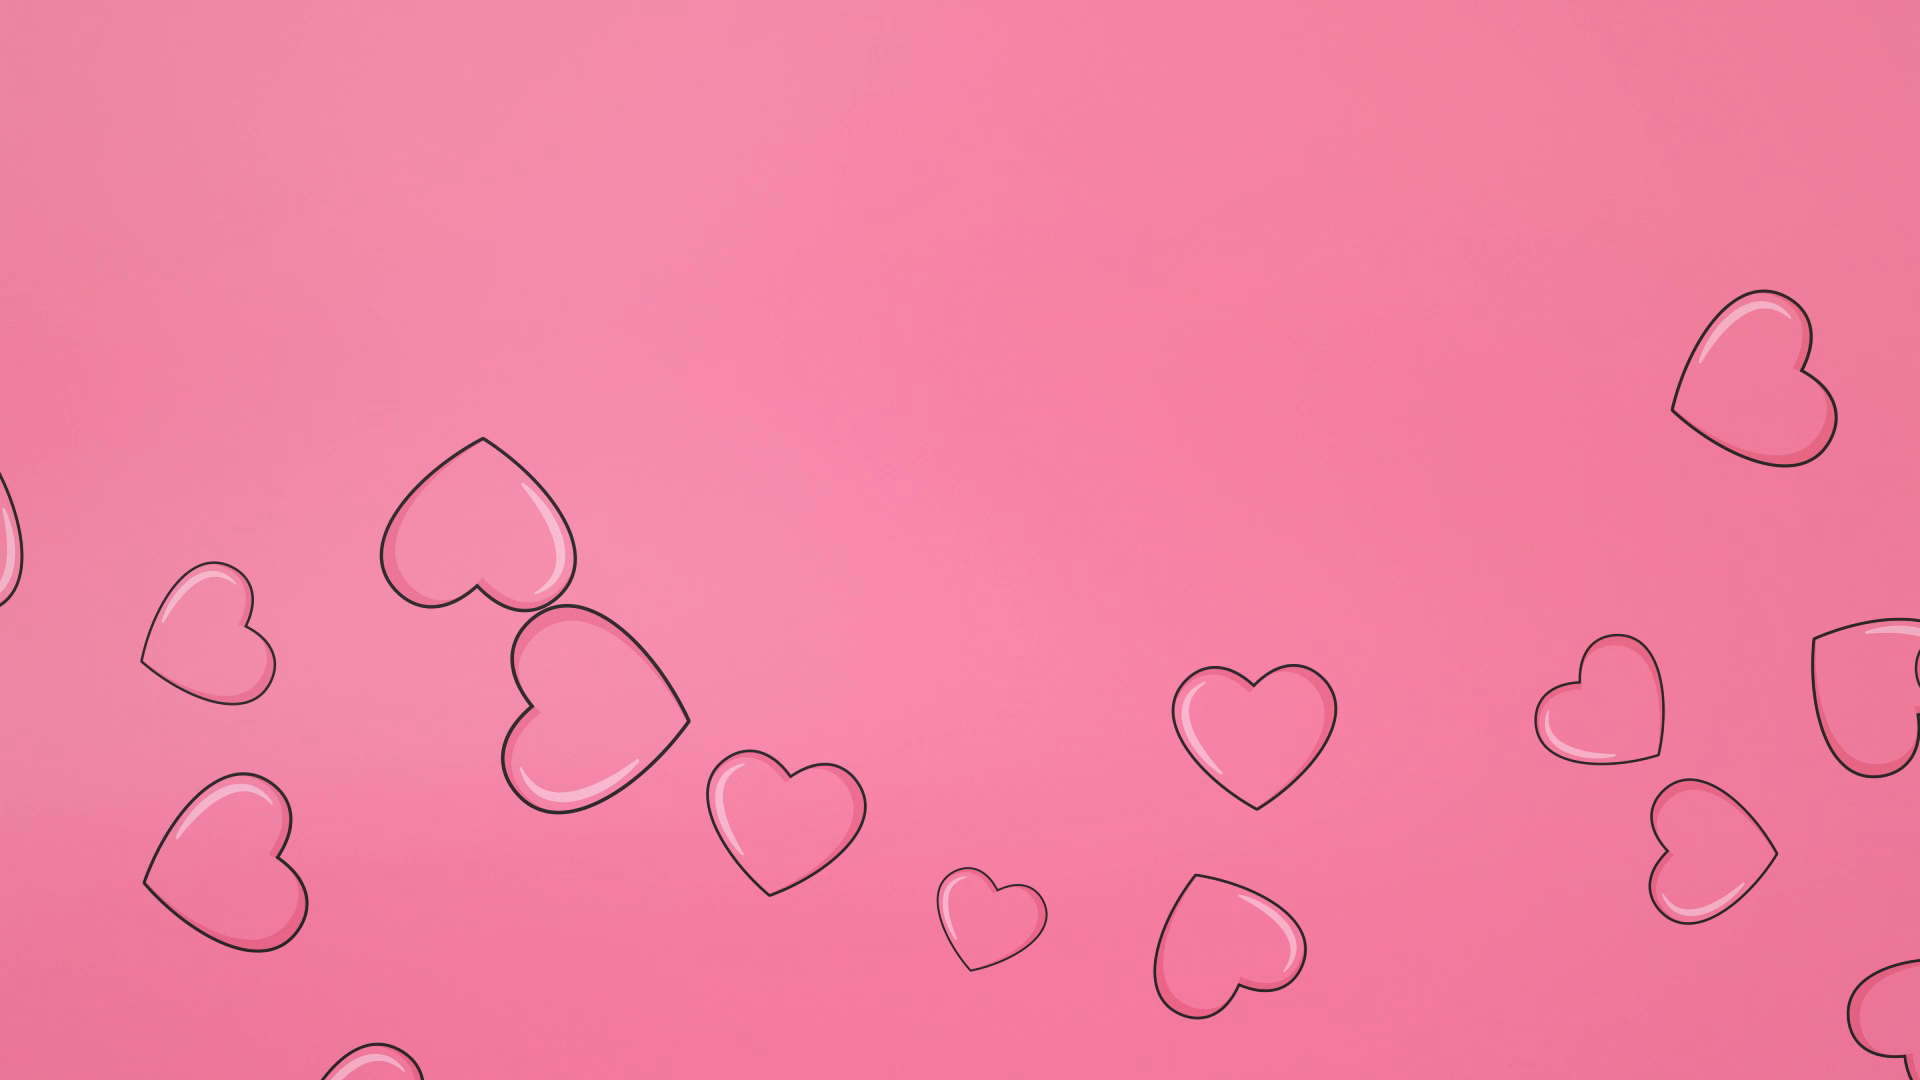 Valentines Pink Heart Background 2 Effect. FootageCrate FX Archives